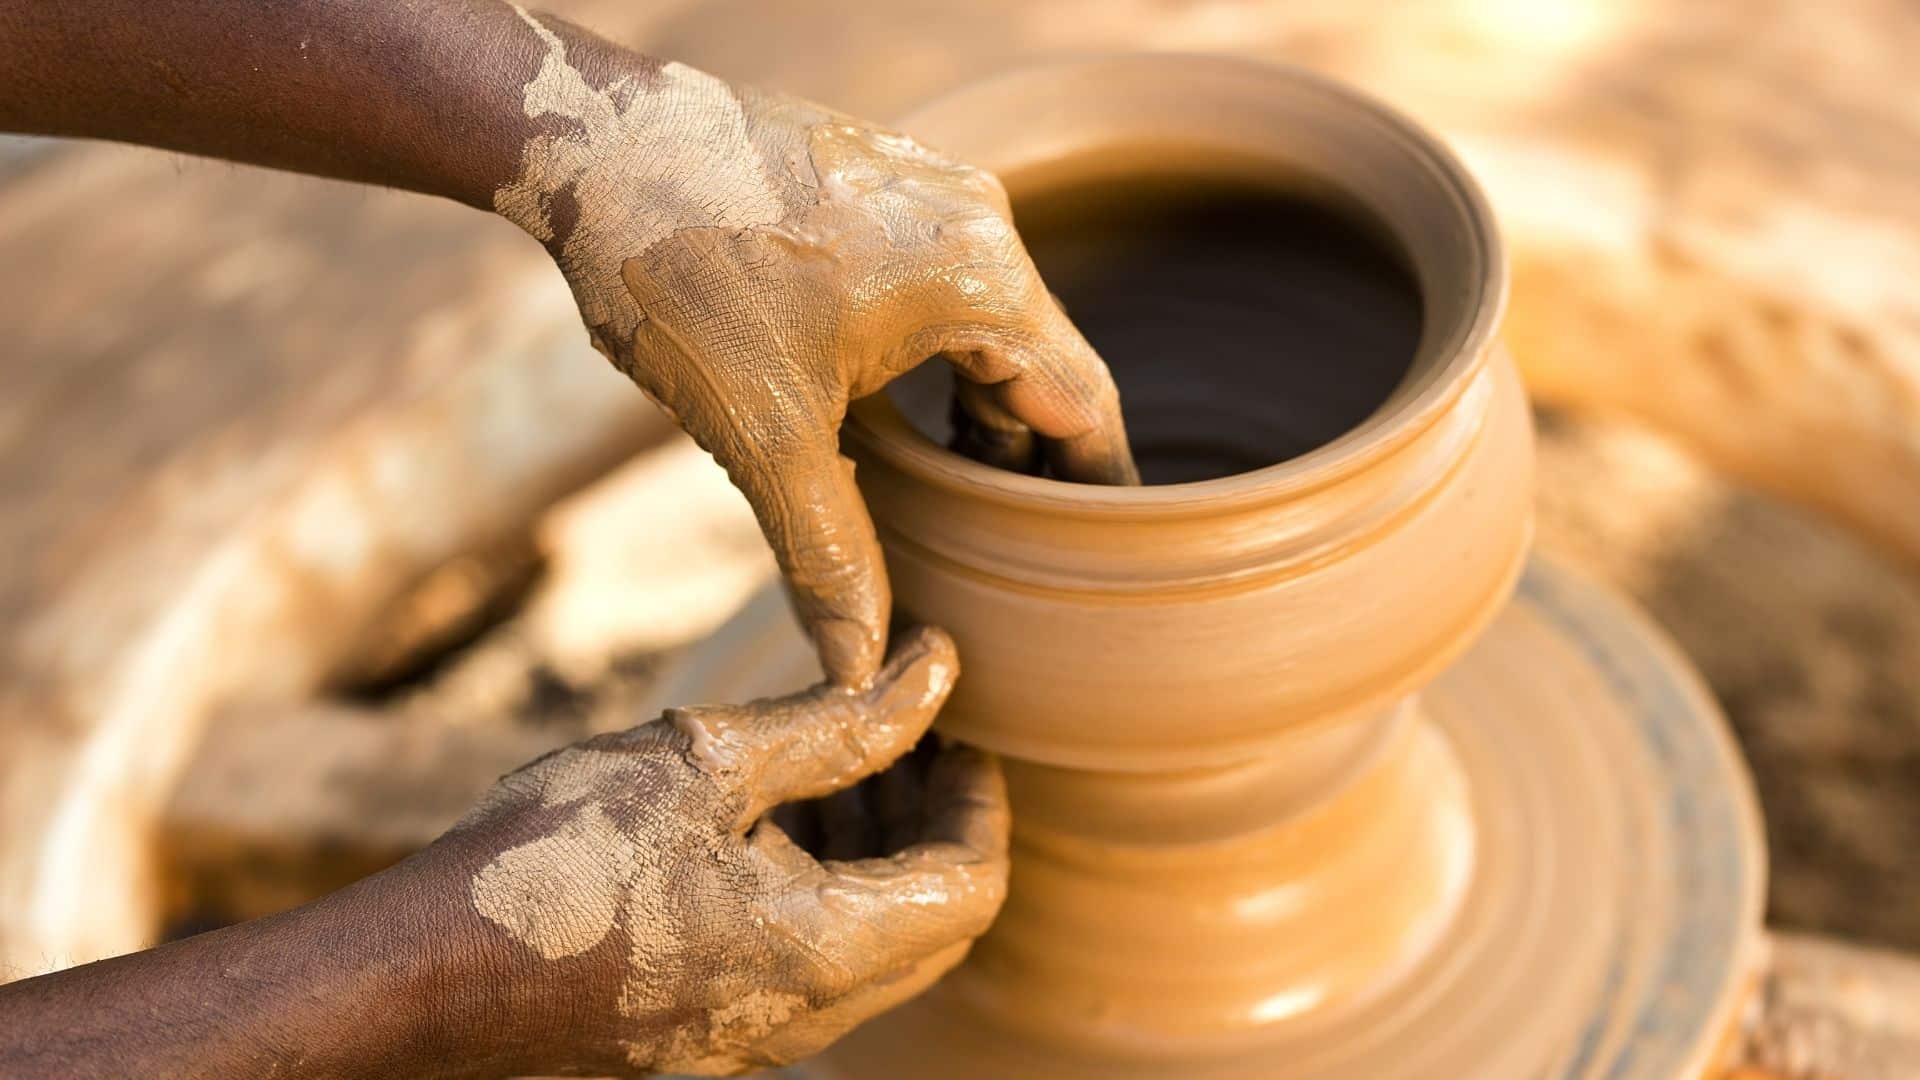 Man making pottery with his hands on a pottery wheel